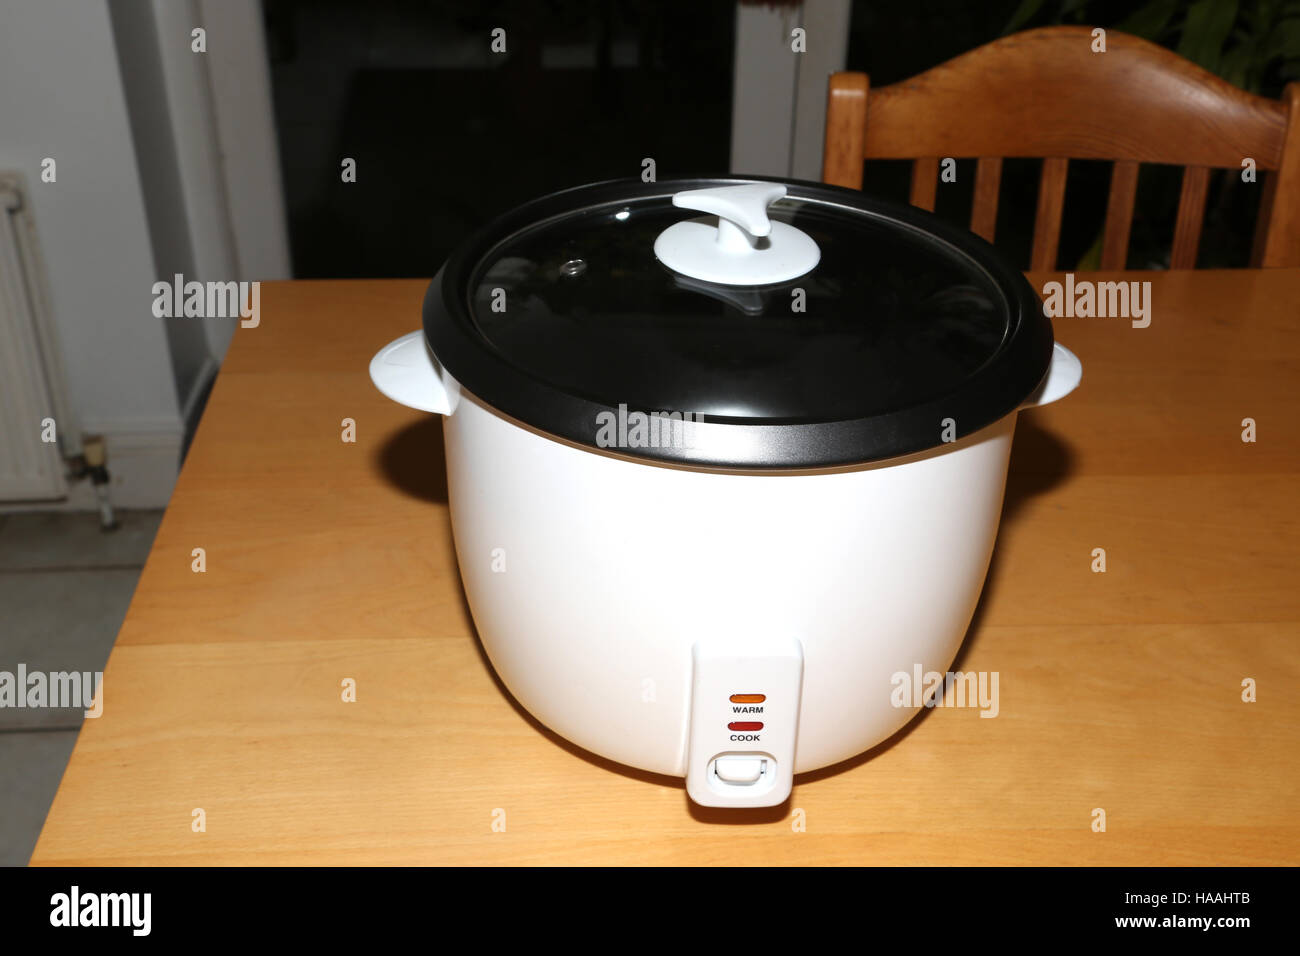 Rice Cooker Stock Photo